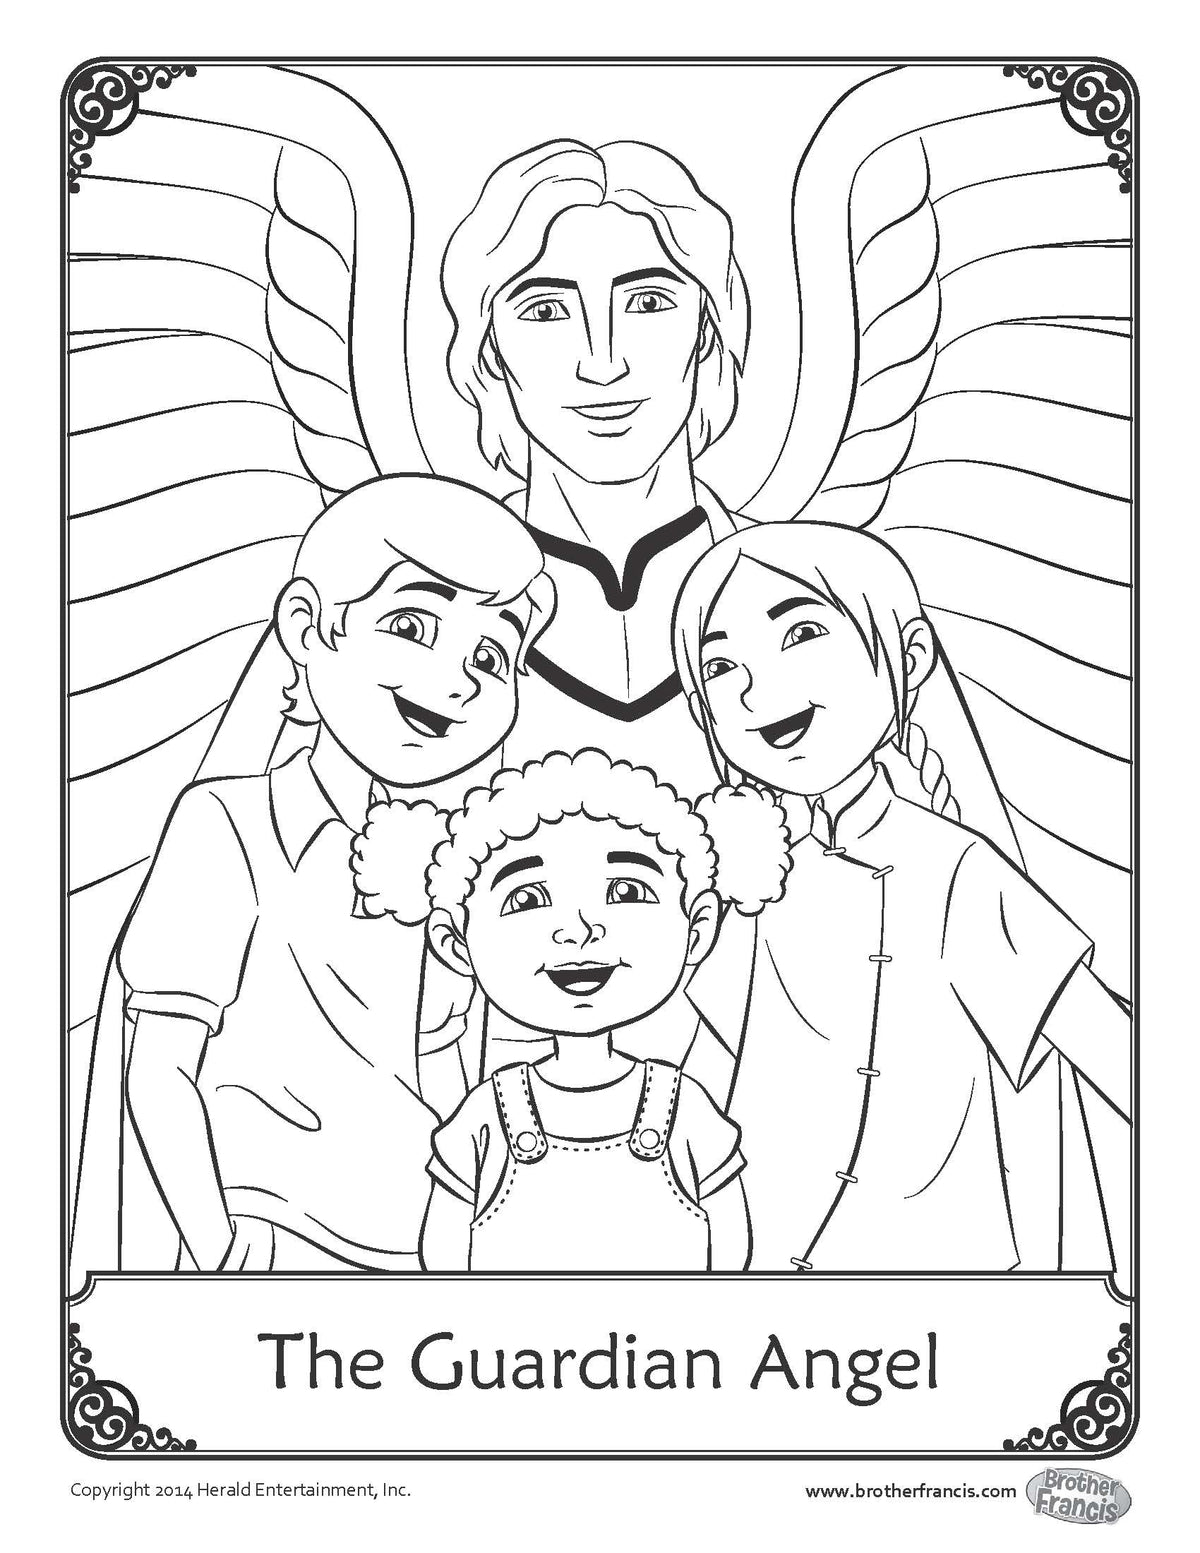 Download and Print - The Guardian Angel